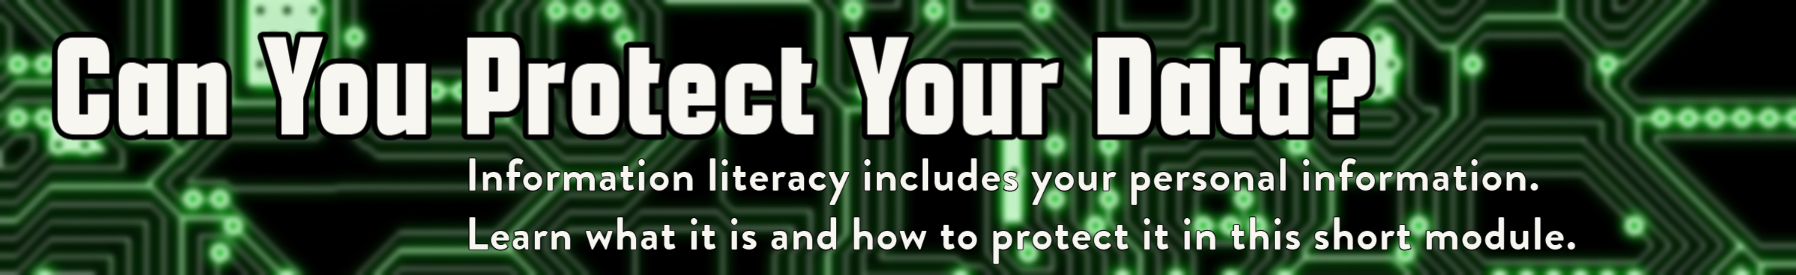 Can you protect your data?  learn how in this module